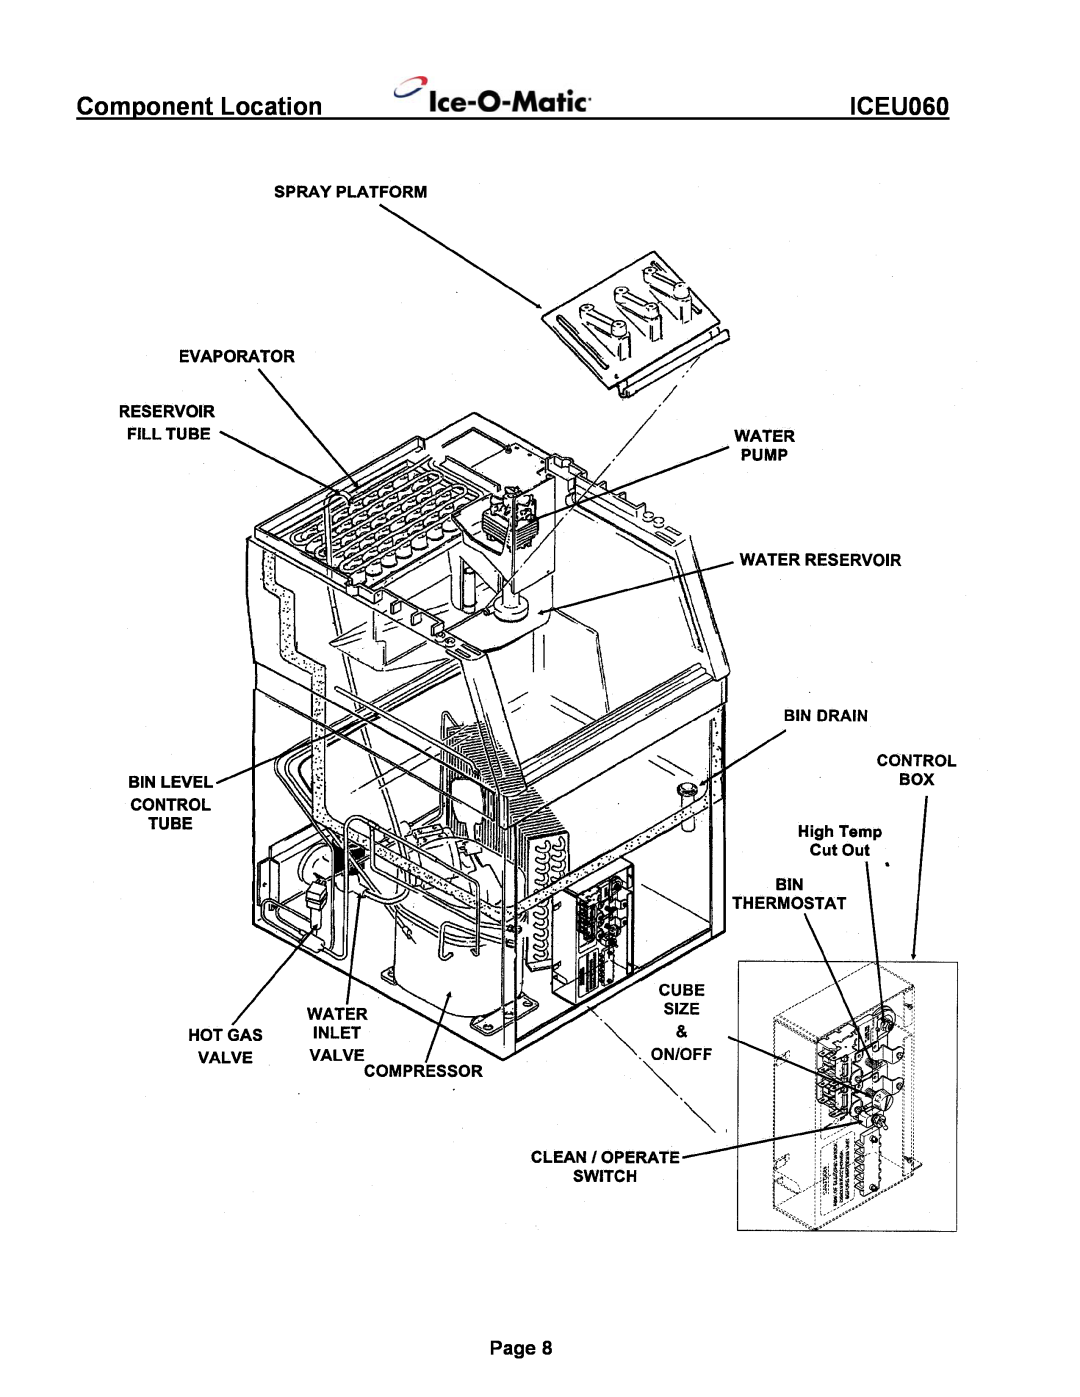 Ice-O-Matic ICEU060 installation manual Component Location, Page 